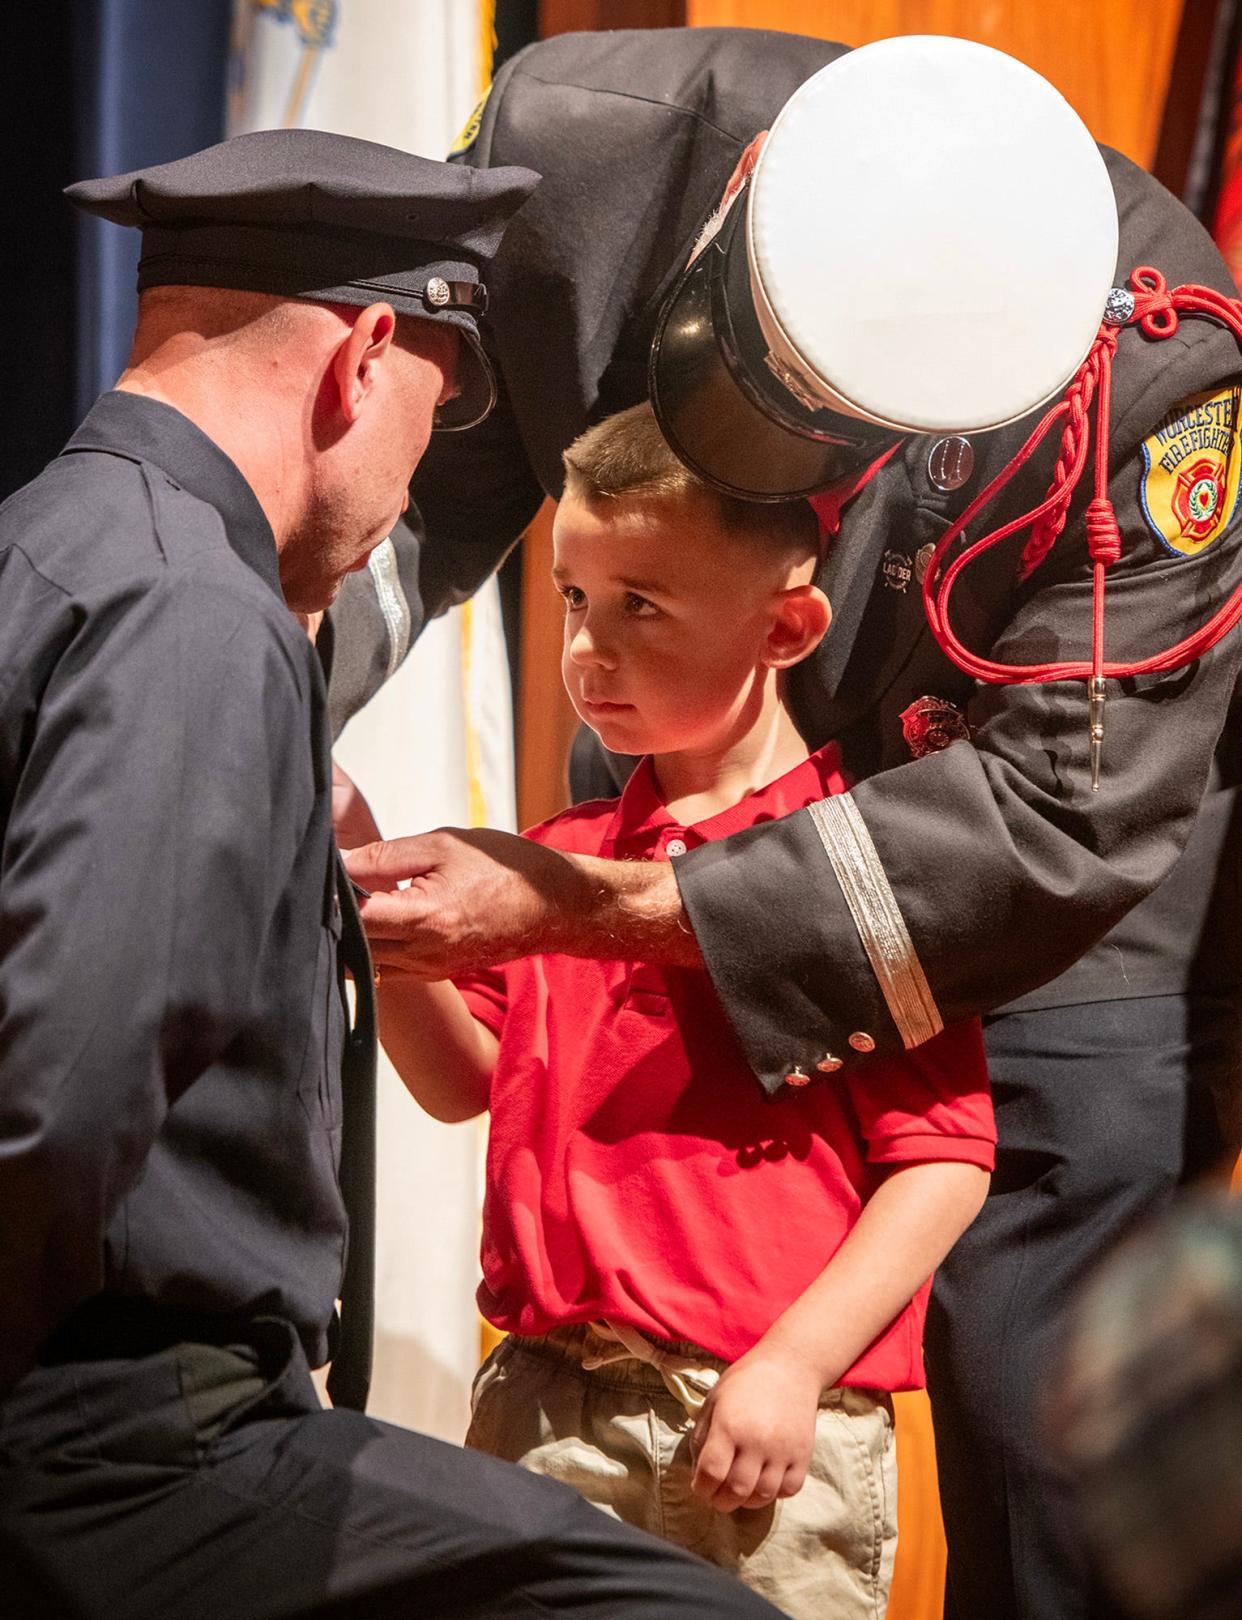 Newly sworn firefighter Justin Anger has his badge pinned on by his father, Worcester Fire Capt. David Anger, and his son Caleb during the Worcester Fire Department recruit class graduation ceremony Friday at Worcester Technical High School. His brother Tyler was also pinned by his father and grandfather at the ceremony.